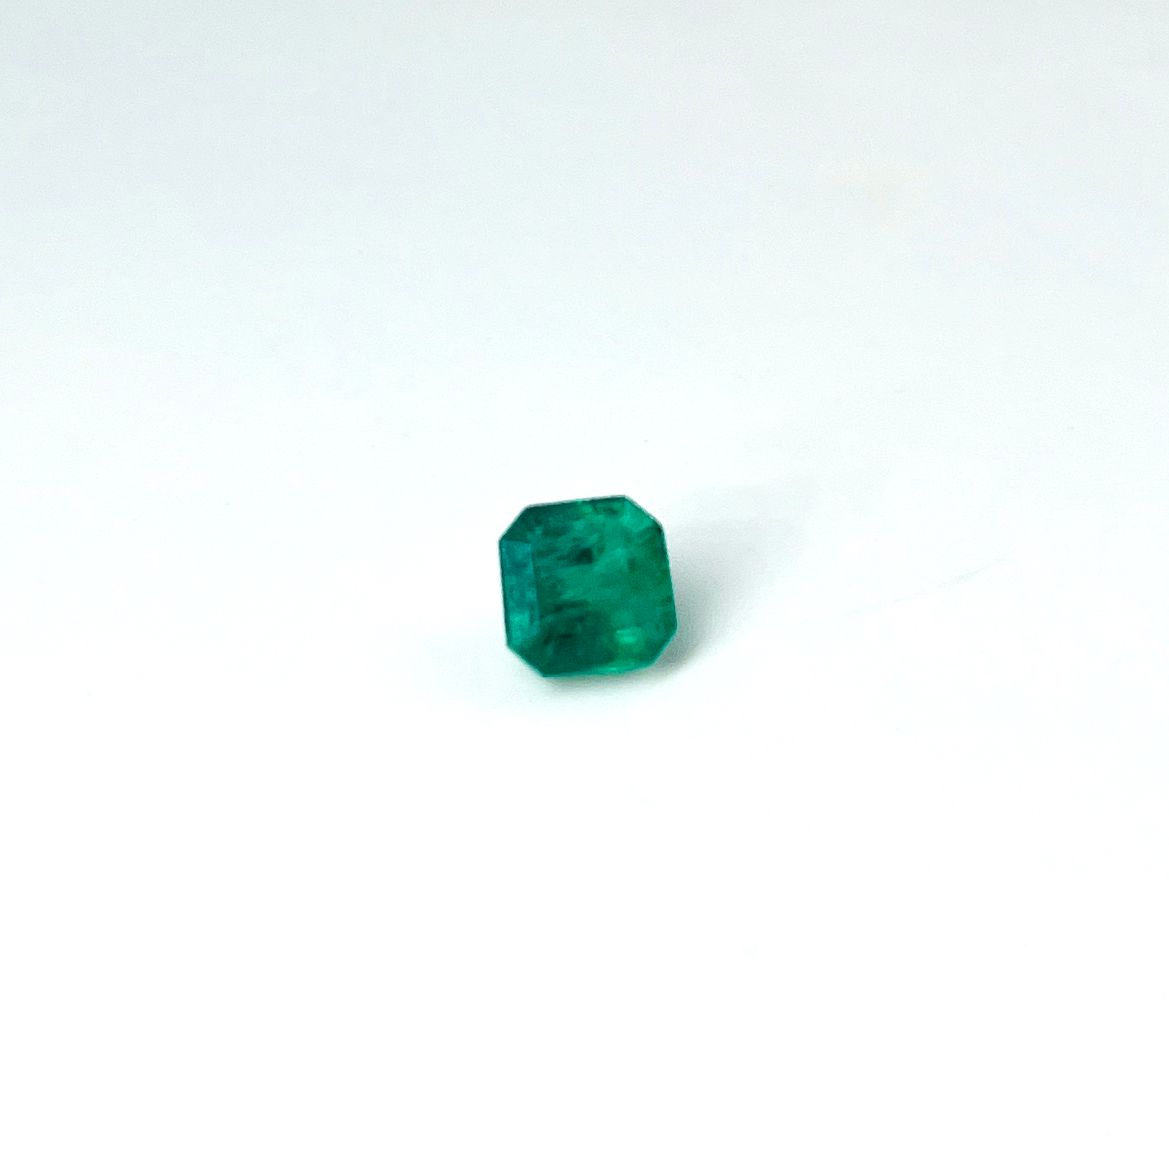 Null Square cut emerald weighing 1.96 ct. (chips) Accompanied by an AIG certific&hellip;